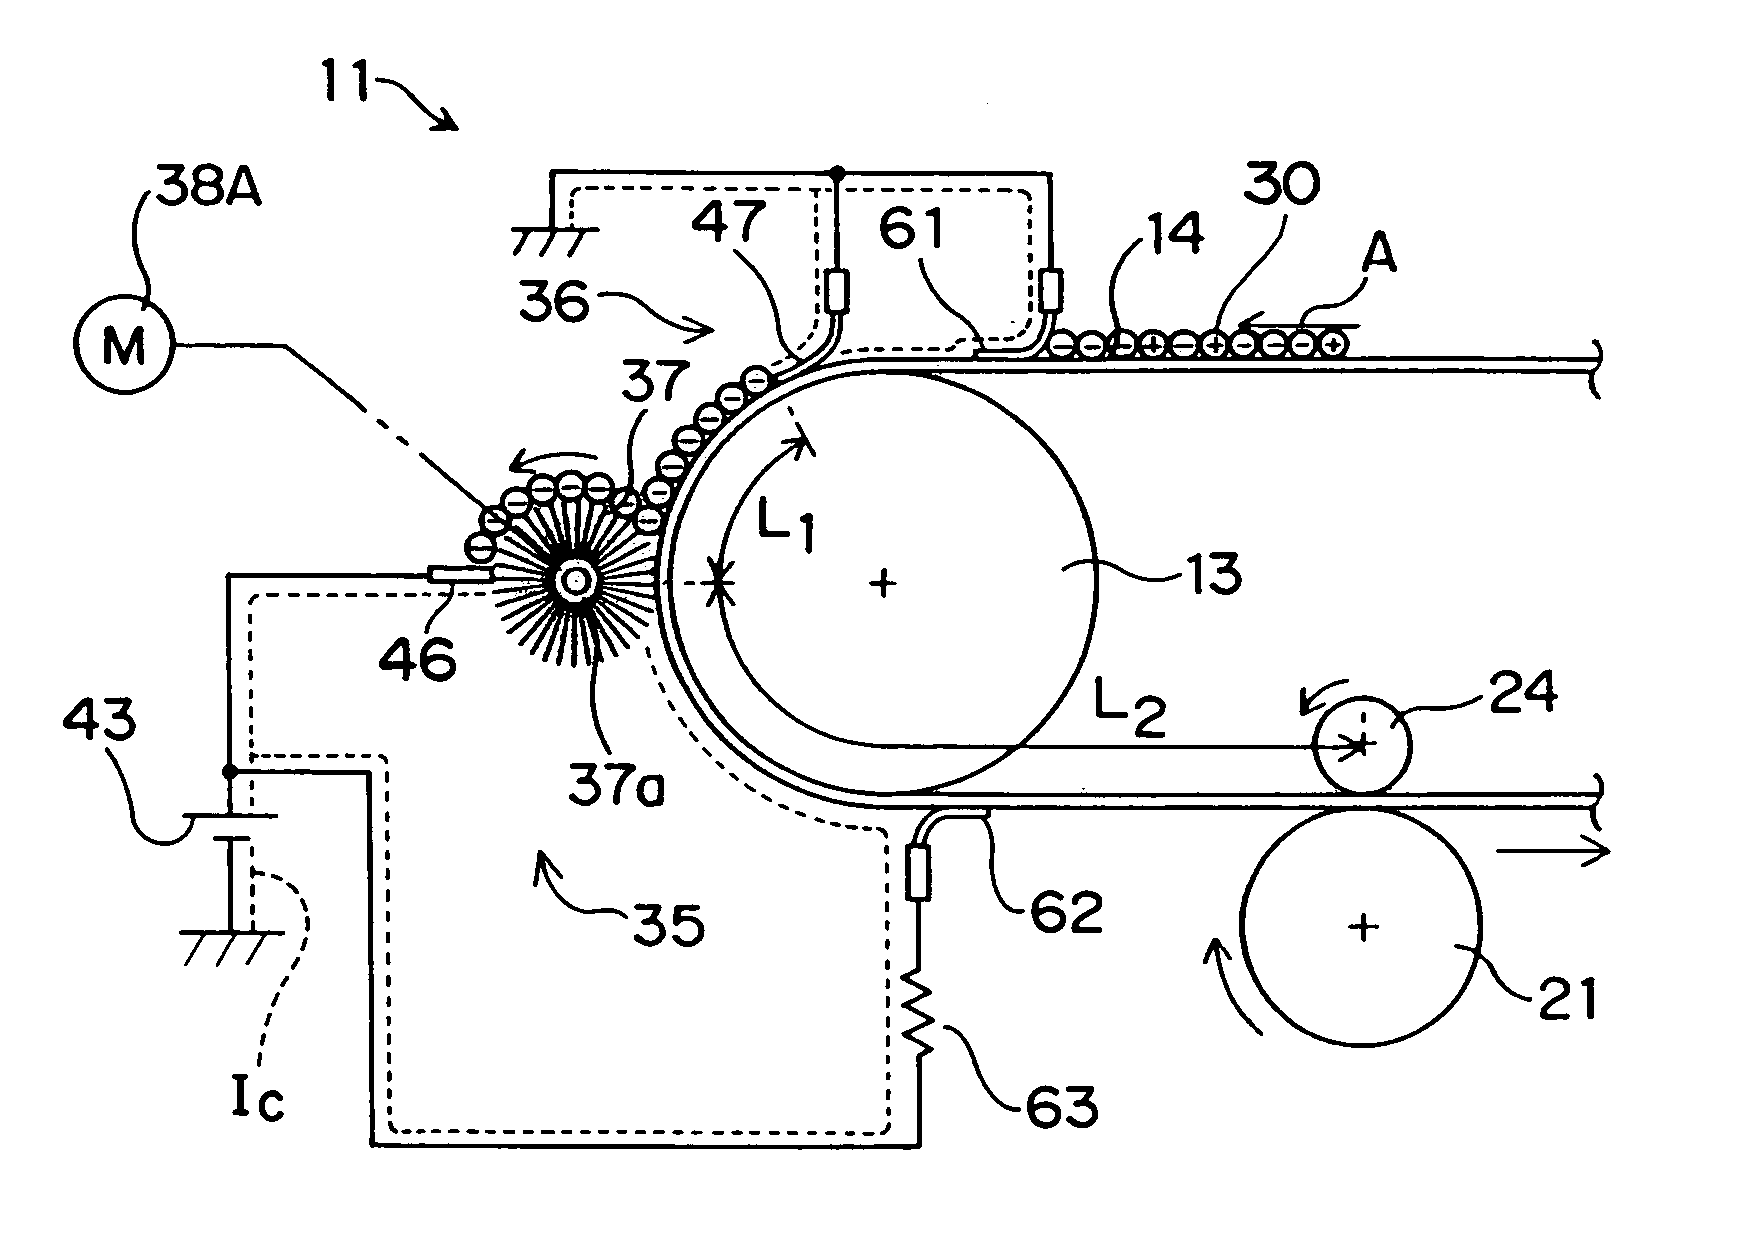 Cleaning device for collecting toner on a surface of an image forming apparatus